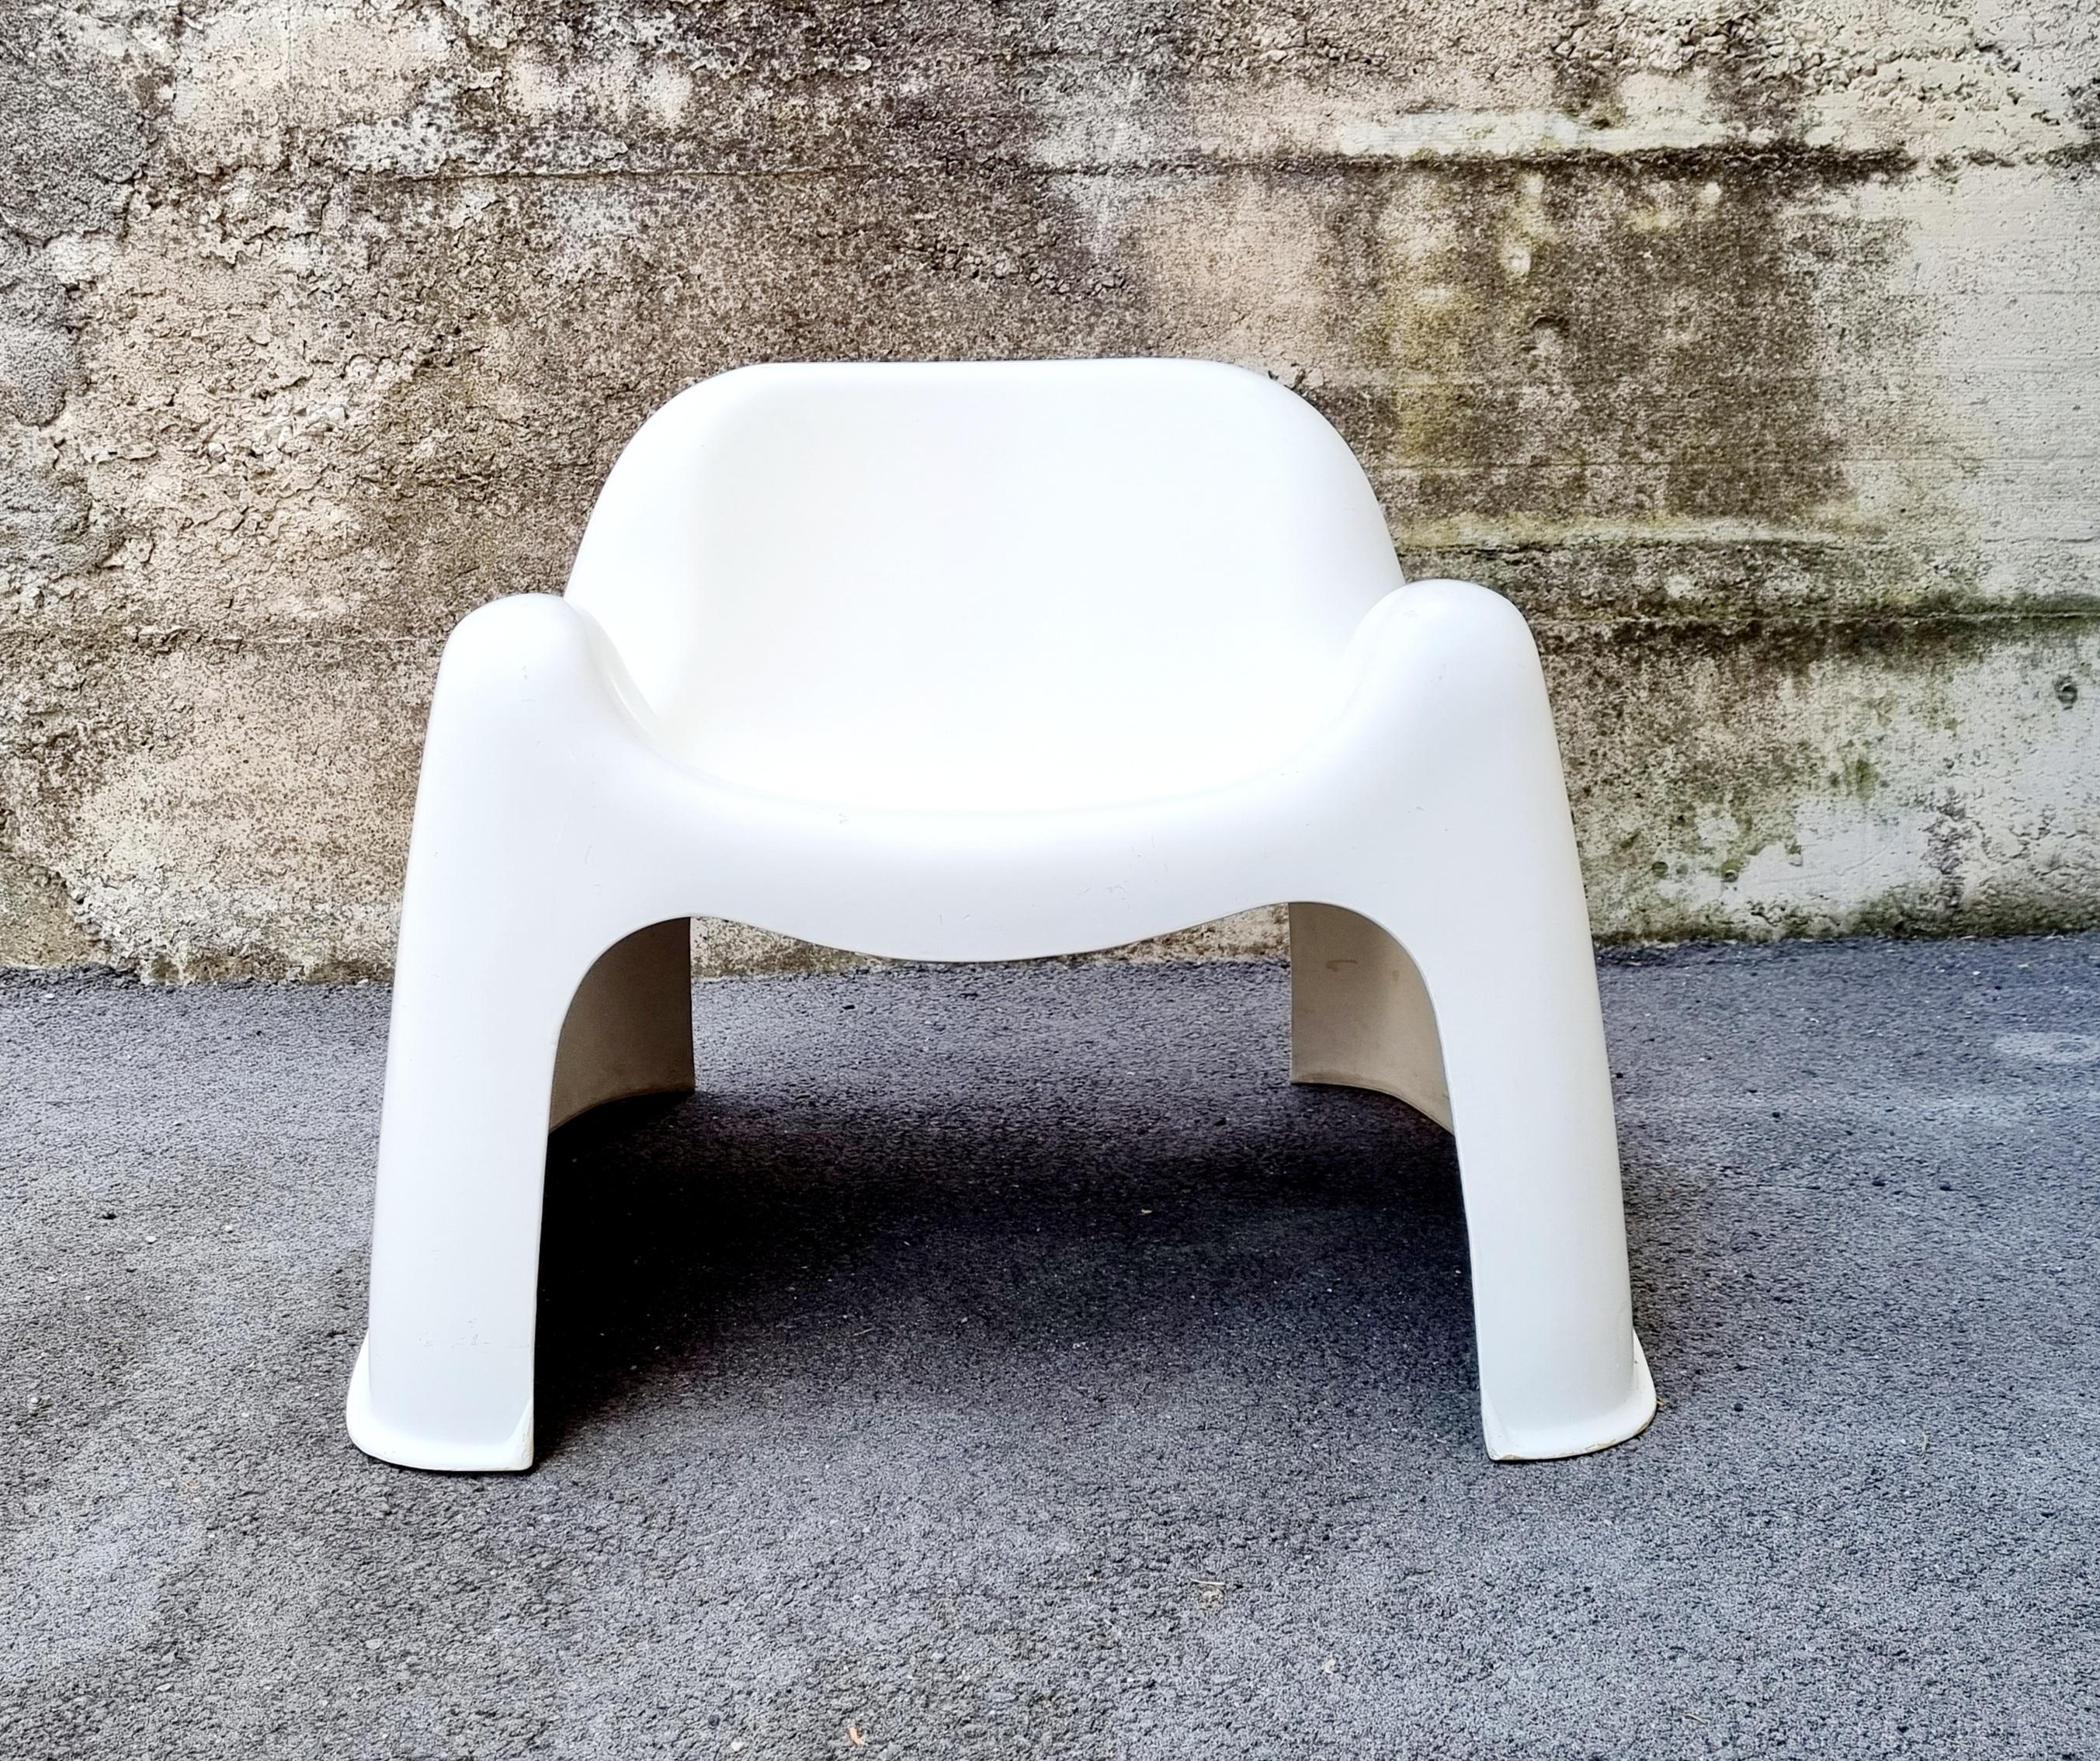 The Toga chair was designed in 1968 by Sergio Mazza for Artemide.
With its flowing shape this chair is like an organic sculpture.
The fiberglass was cast into one piece.
Toga chair is part of the Albert & Victoria Museum collection in